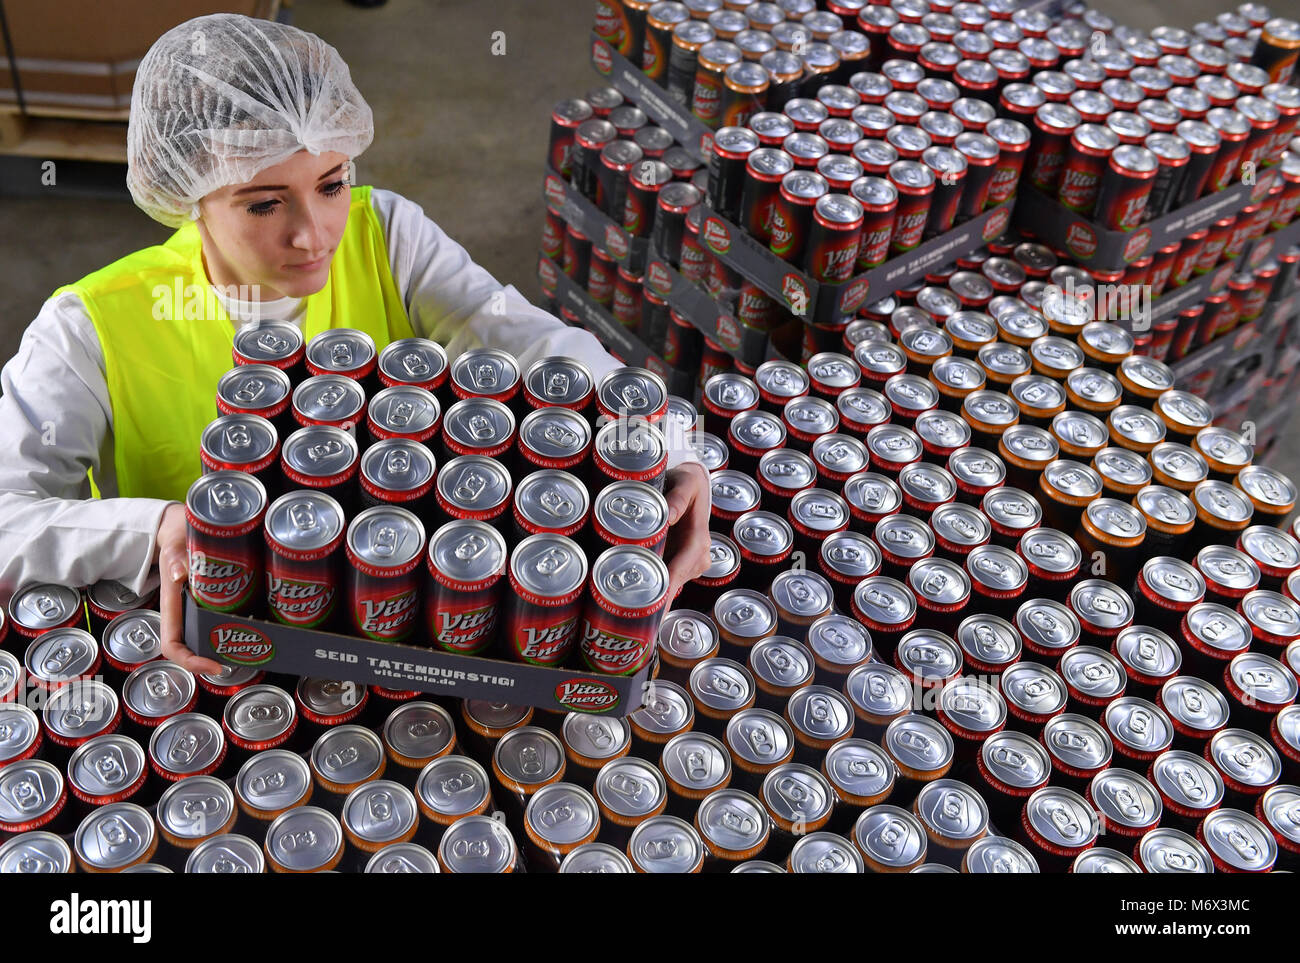 10 February 2018, Germany, Lichtenau: Verena Schmidt, employee of Lichtenauer Mineralquellen GmbH, loading boxes of Vita Energy cans onto a pallet. The launch of two new varieties of Vita Energy in the eastern German market is planned for March 2018. Twelve alcohol-free refreshment drinks are now available under the Vita Cola brand. Photo: Martin Schutt/dpa-Zentralbild/dpa Stock Photo